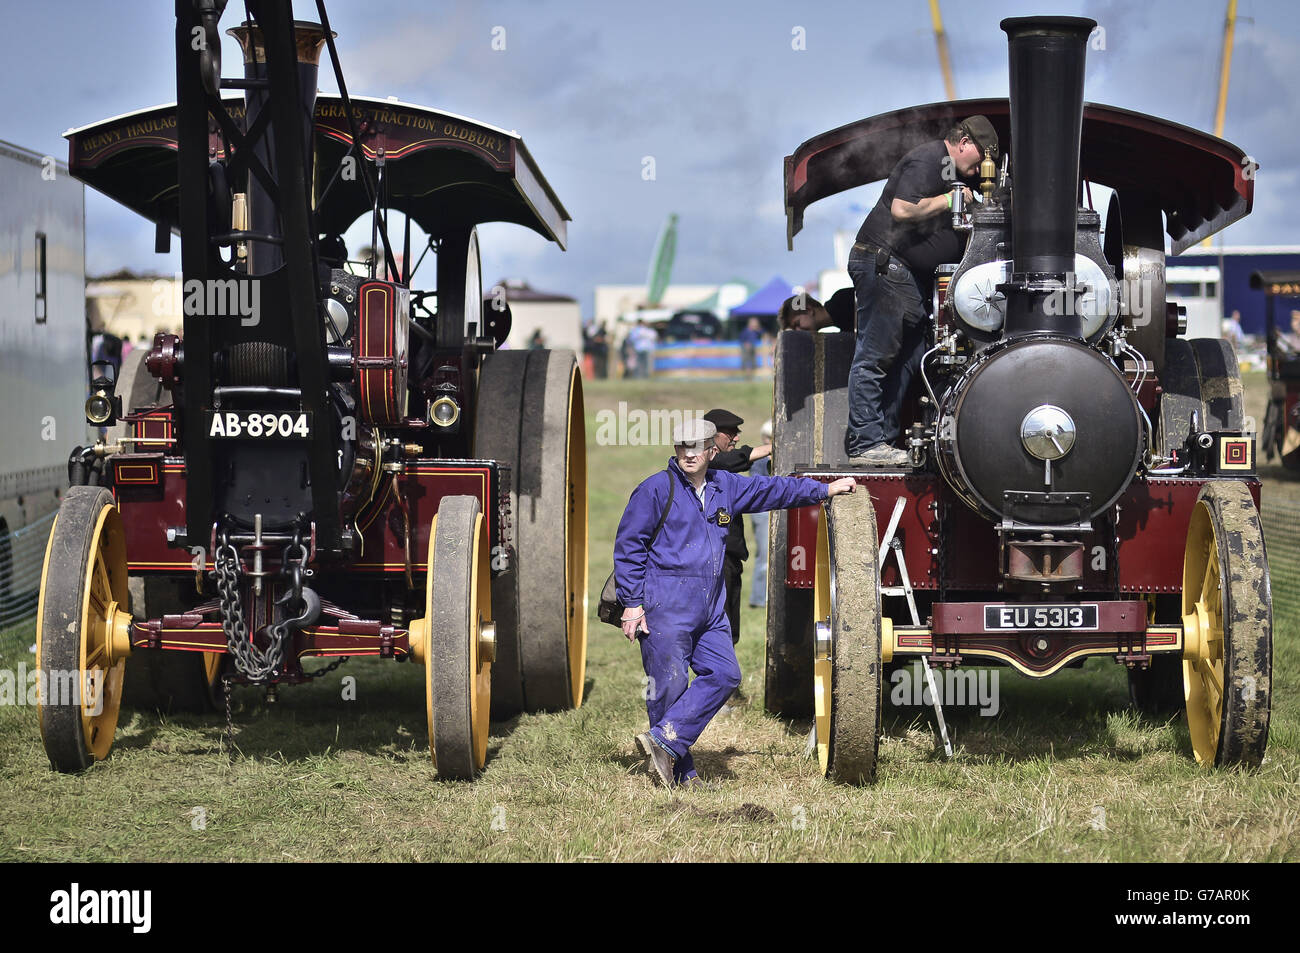 Traction engine crews tinker in preparation for parading in the main arena at the Great Dorset Steam Fair, where hundreds of period steam traction engines and heavy mechanical equipment from all eras gather for the annual show. Stock Photo